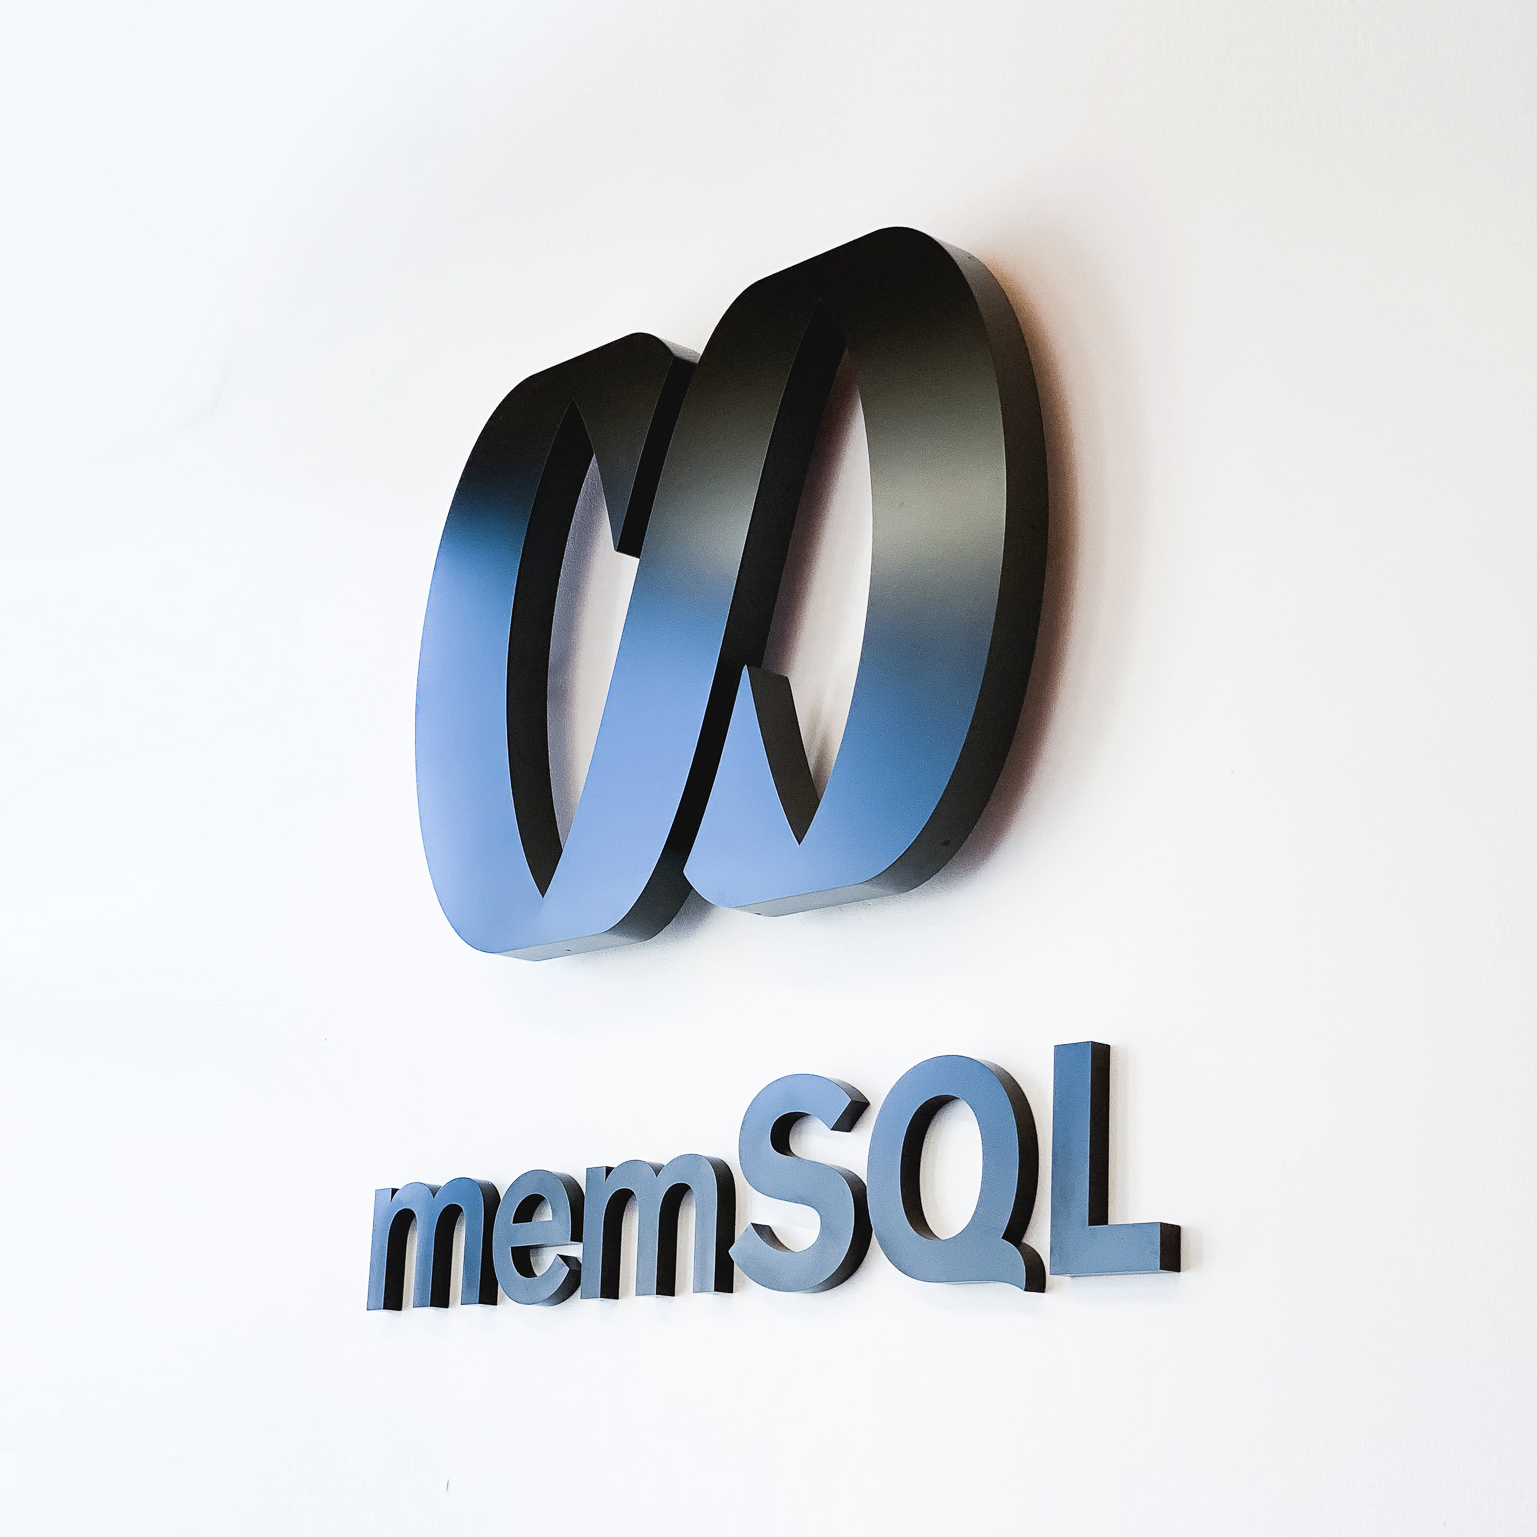 Illuminated black sign with back-lit purple lights for memSQL, a software company in San Francisco, California.